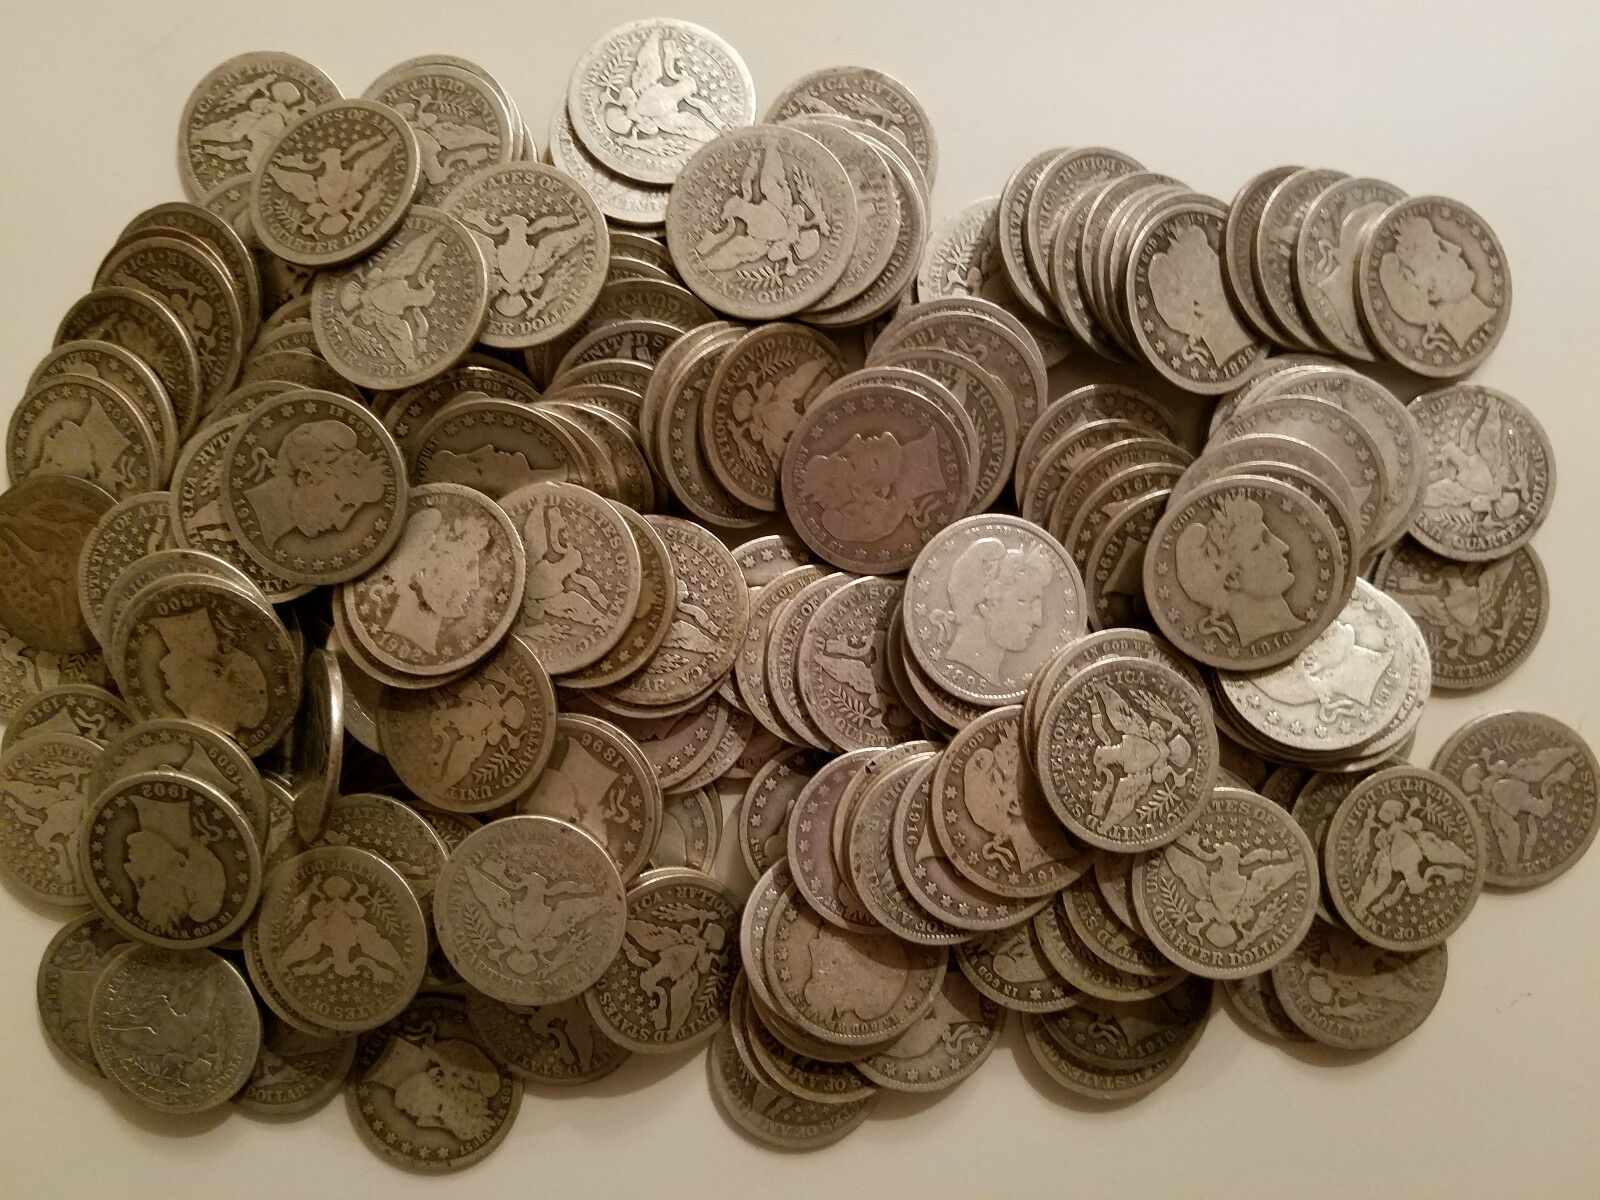 (1) $.25 1892-1916 Barber Quarter U.s. Coin Classic Ag Or Better 90% Silver